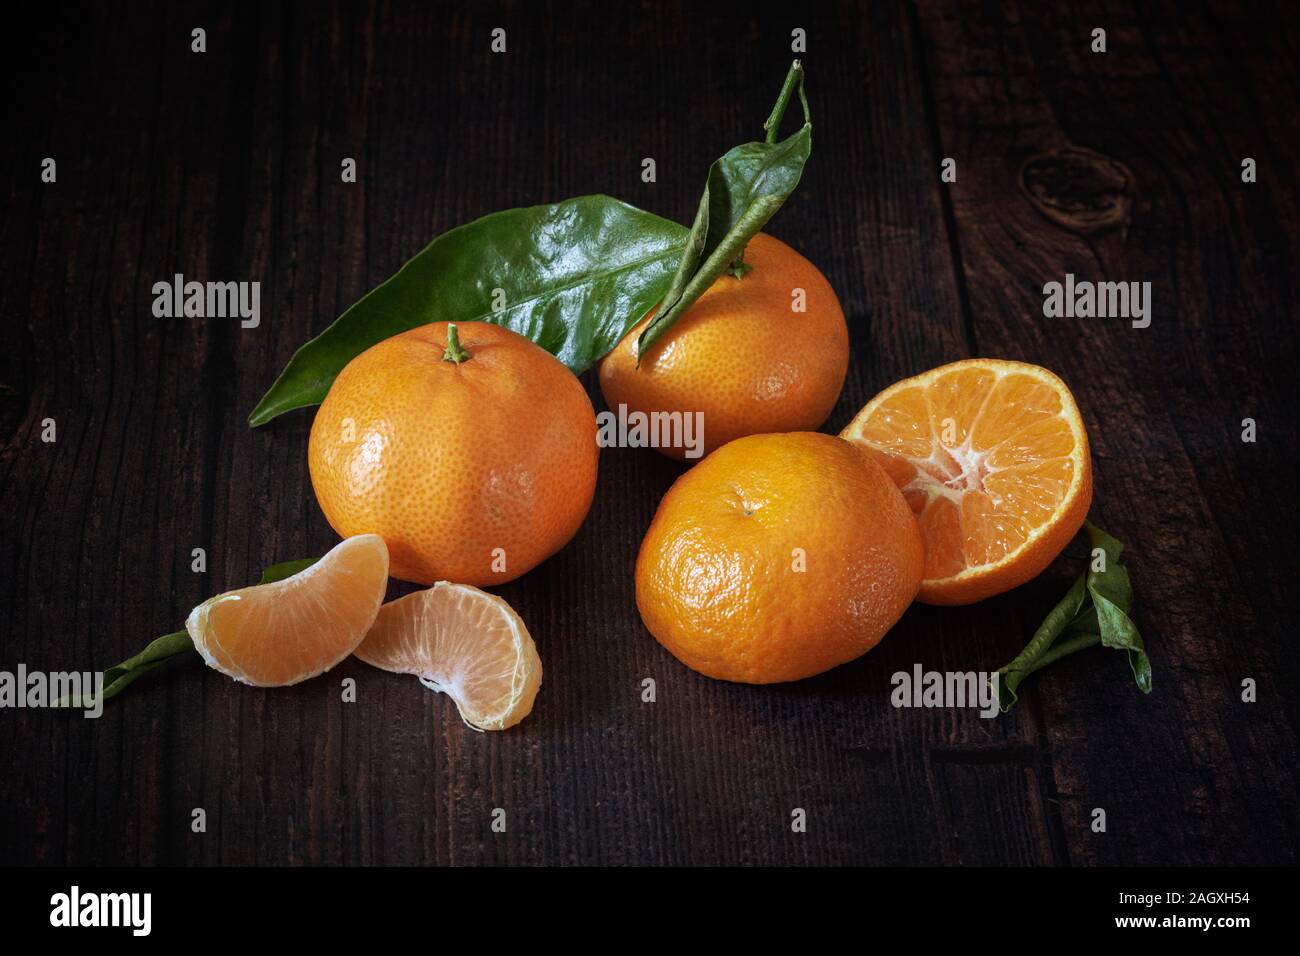 Clementine's on wooden table Stock Photo